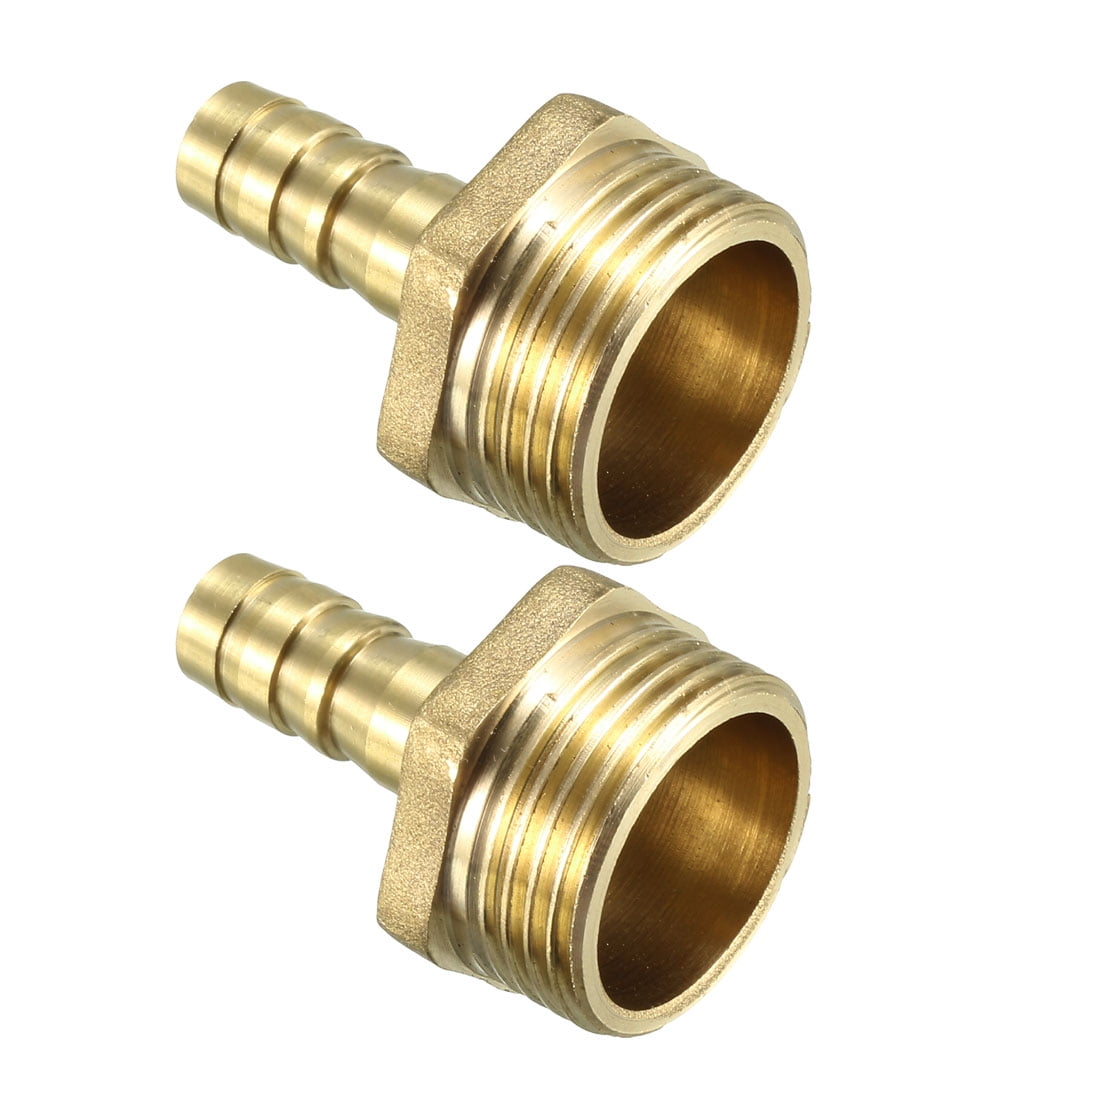 sourcing map Pipe Fitting Tee G1/2 Male Thread 3 Way T Shape Hose Connector Adapter Nickel-Plated Copper 2pcs